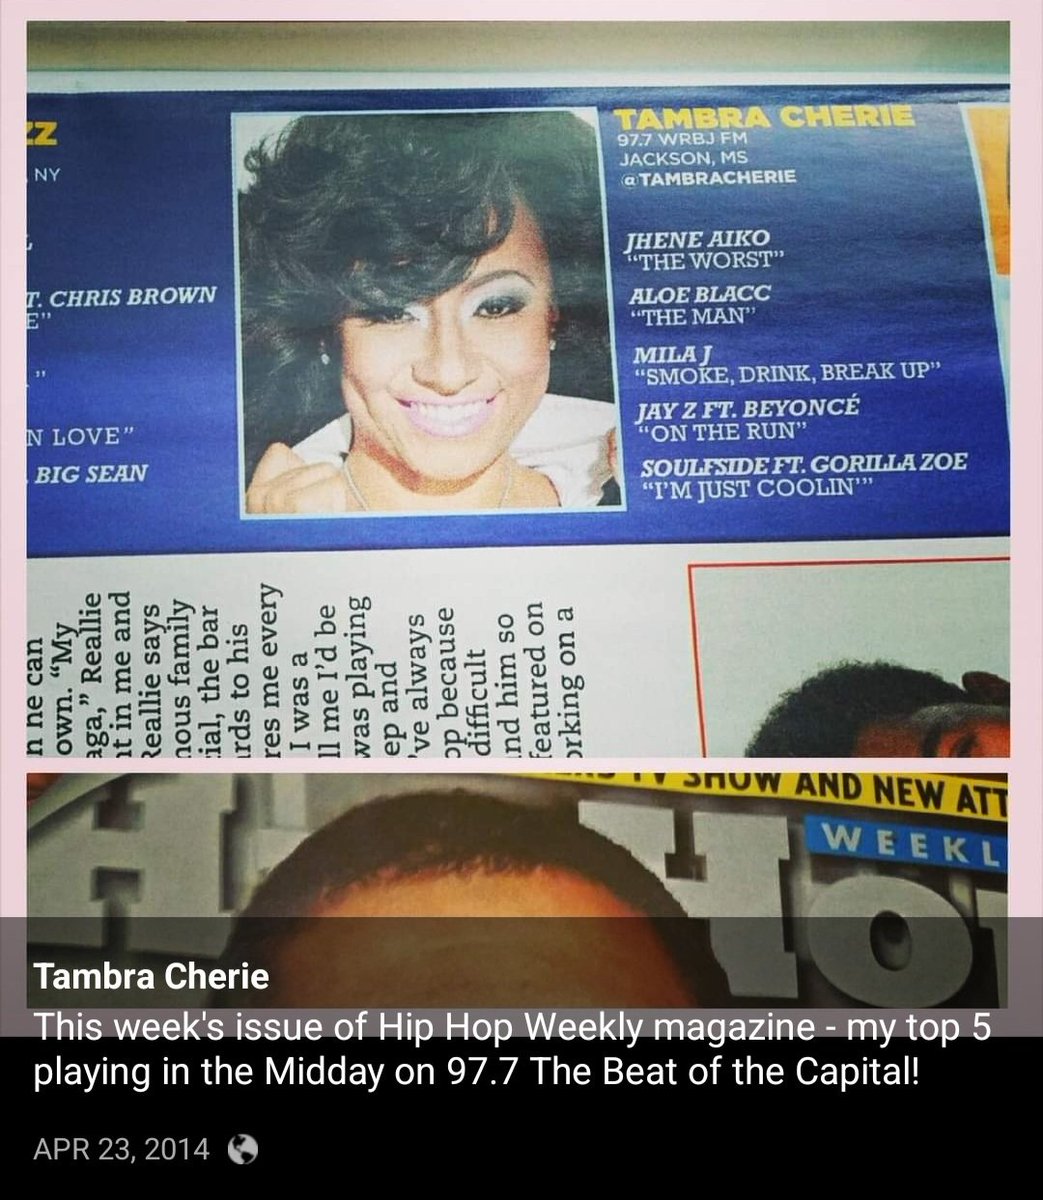 On this day back in 2014 in Hip Hop Weekly's Magazine was my Top 5 songs playing inside the Midday @977fm! 10 years ago though! 🤫Time tends to fly by when you're having fun!🎙🎶🎤🌍 #WomeninRadio #WomenonAir #HipHopWeekly #Womeninmedia